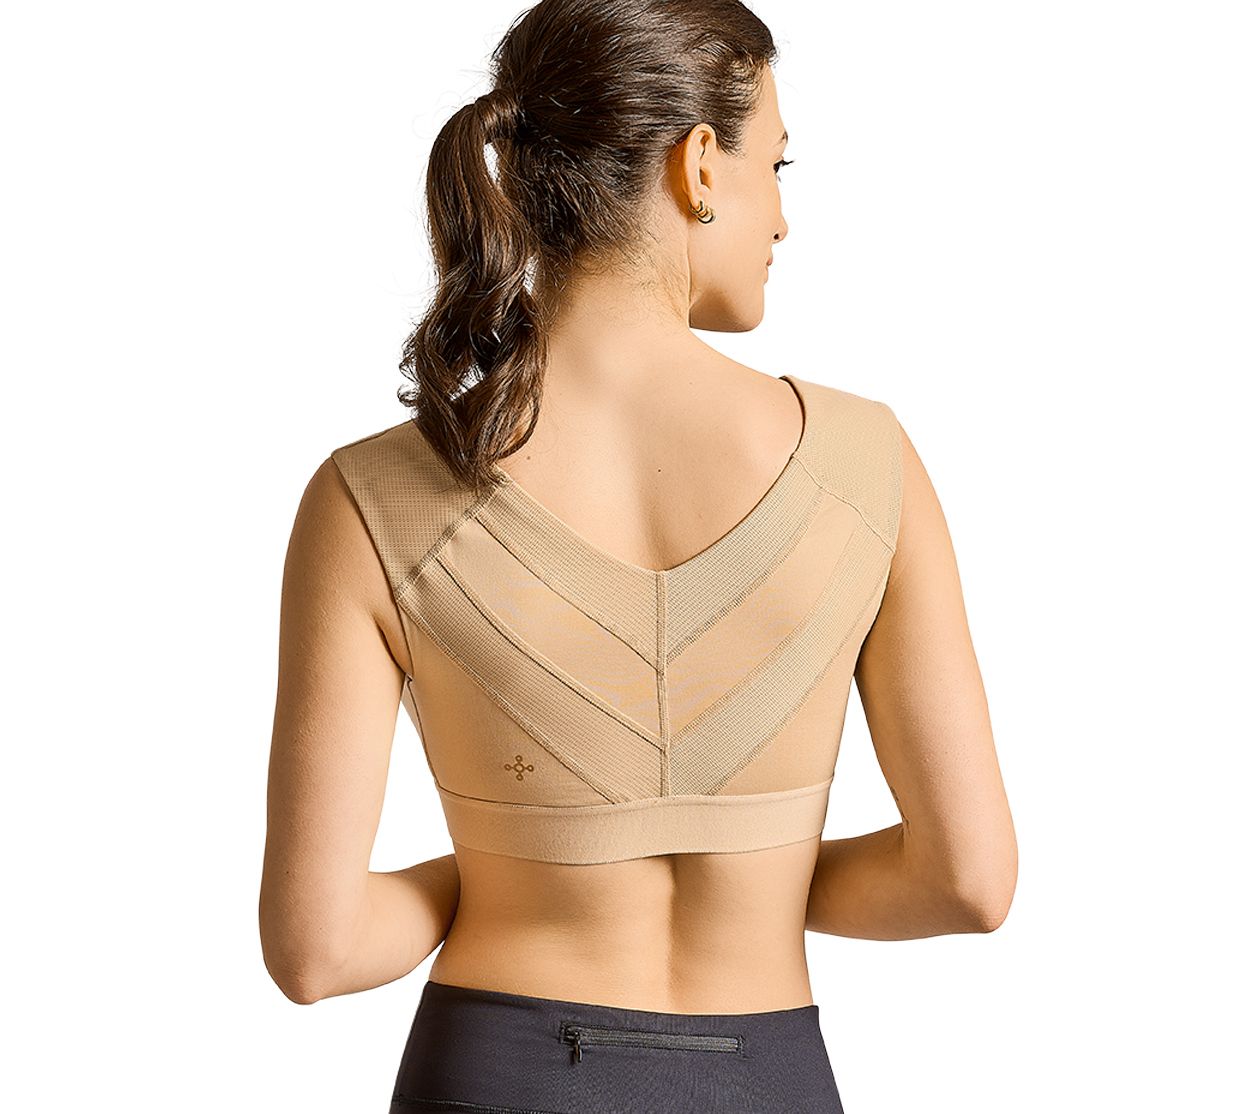 Tommie Copper Shoulder Support Bra with Front Zipper 